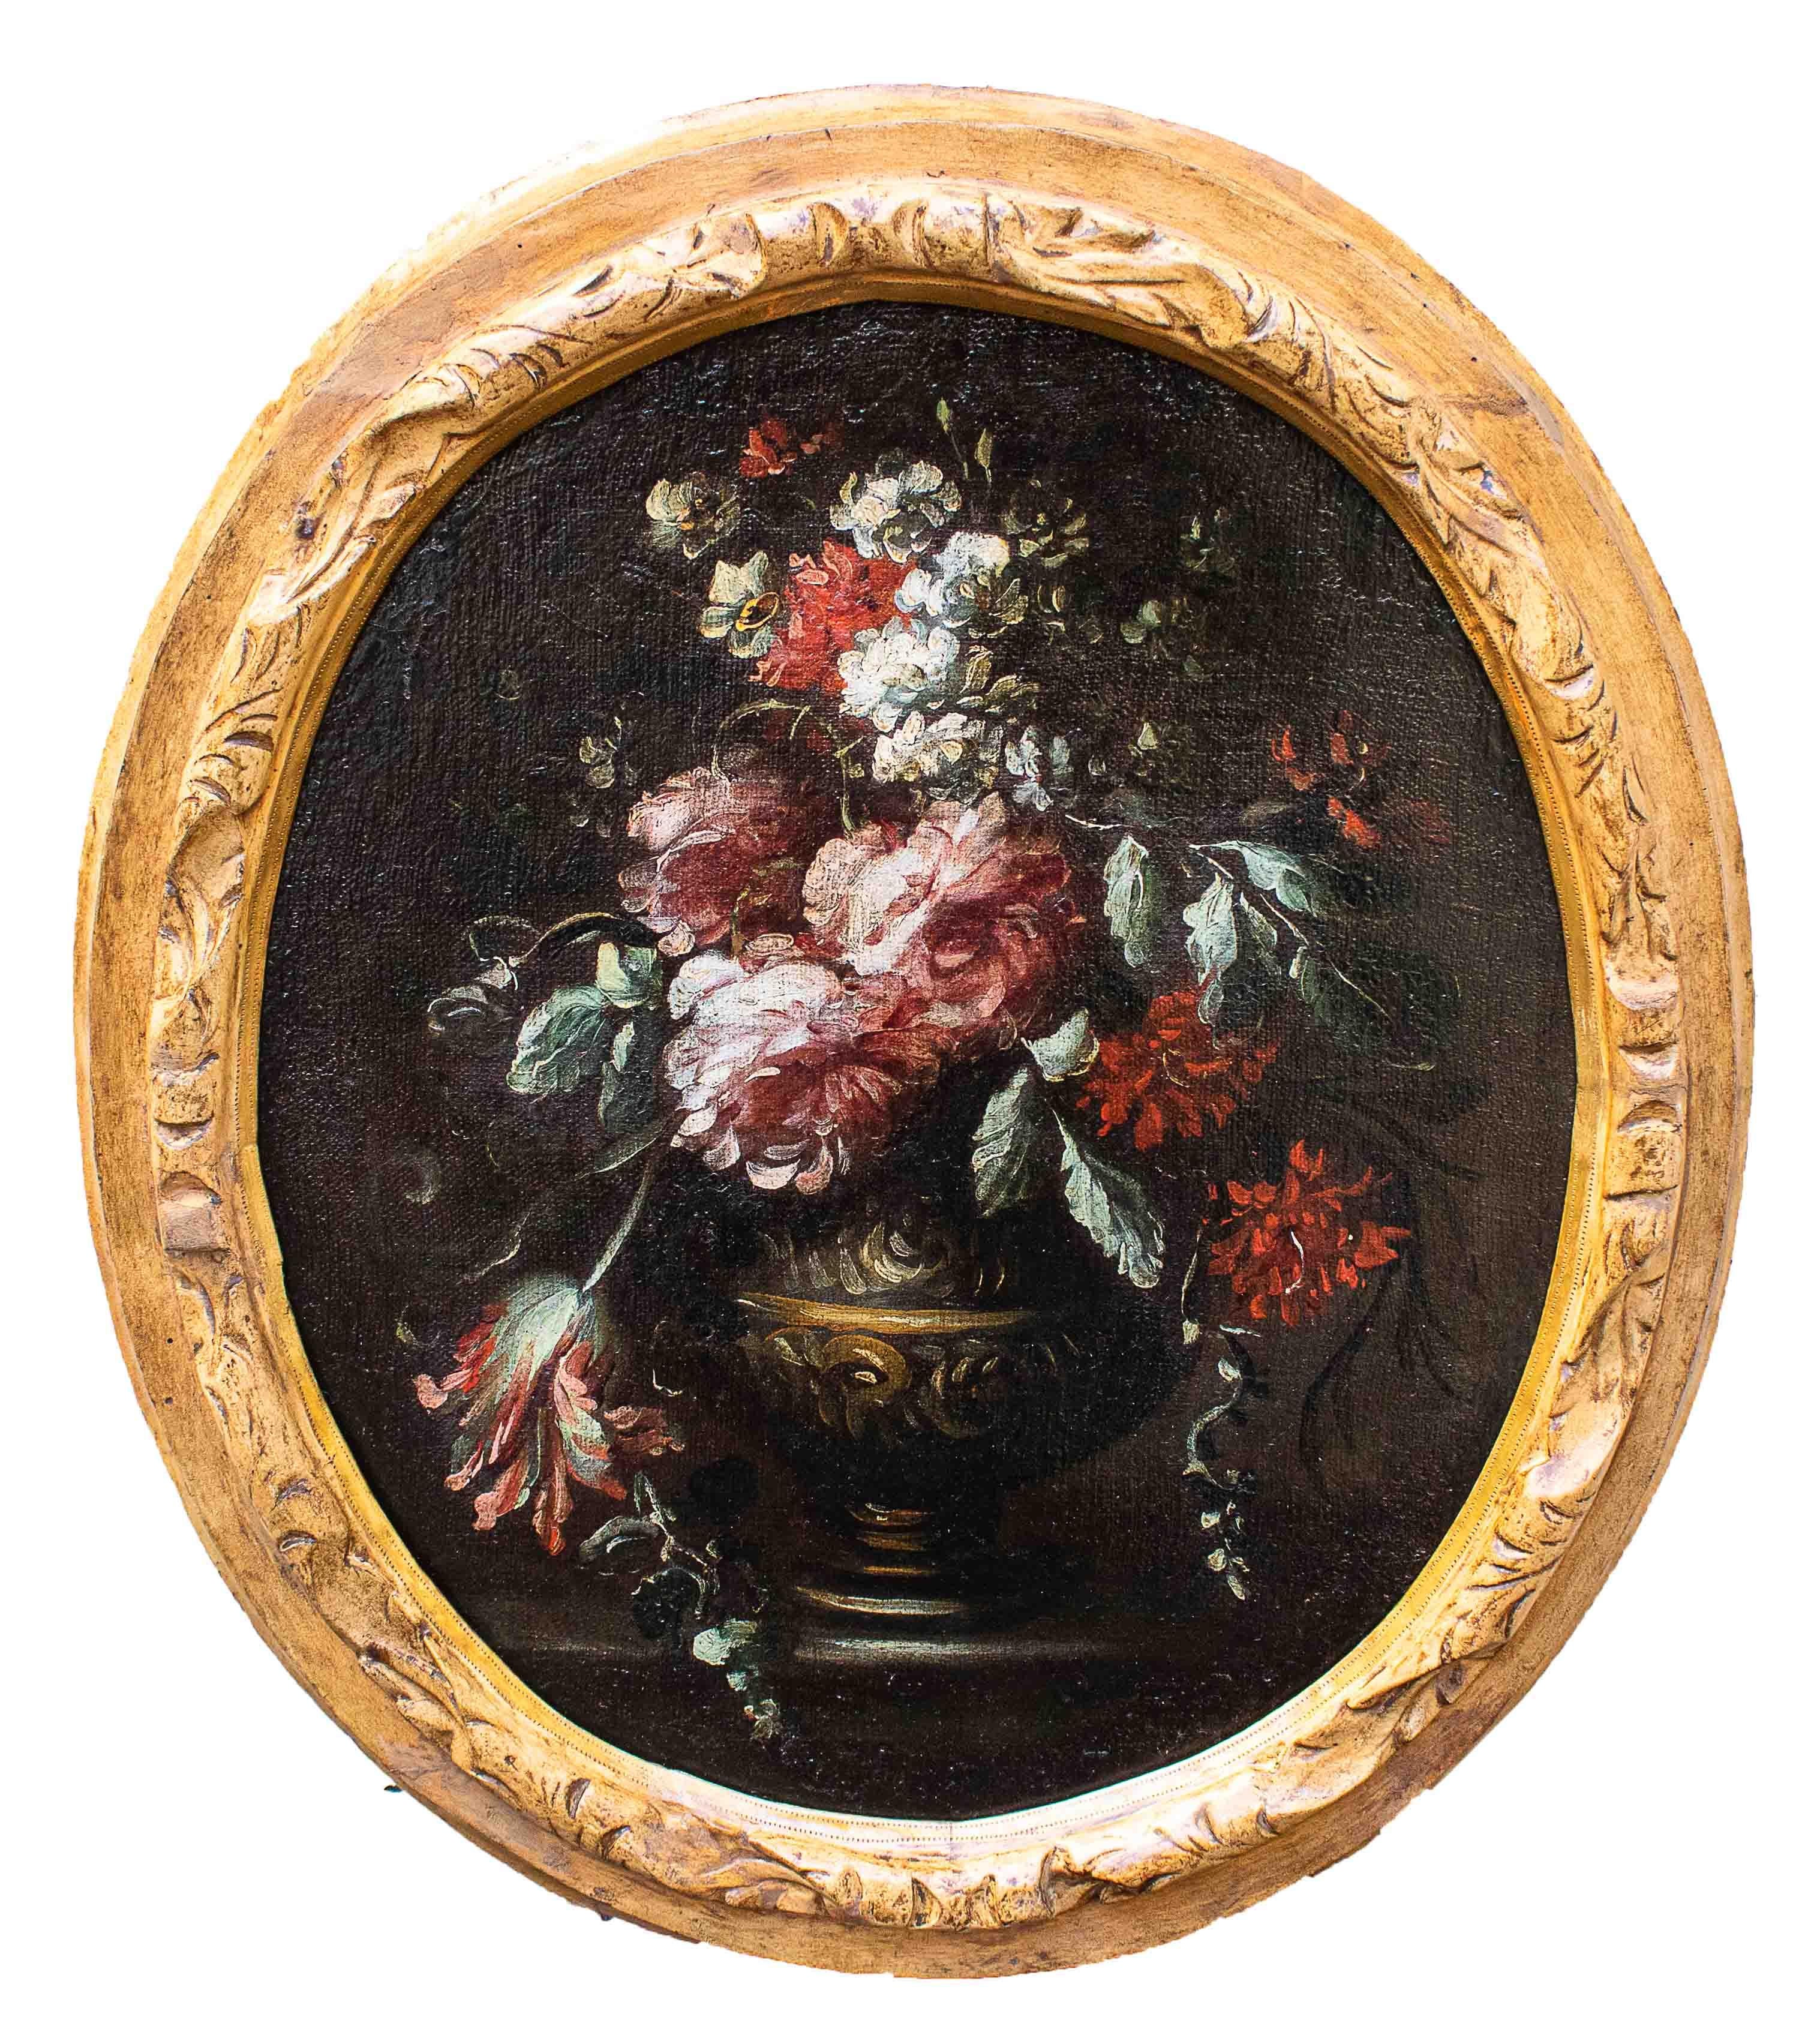 Oiled 17th Century Still Lifes with Flowers Paintings Oil on Canvas